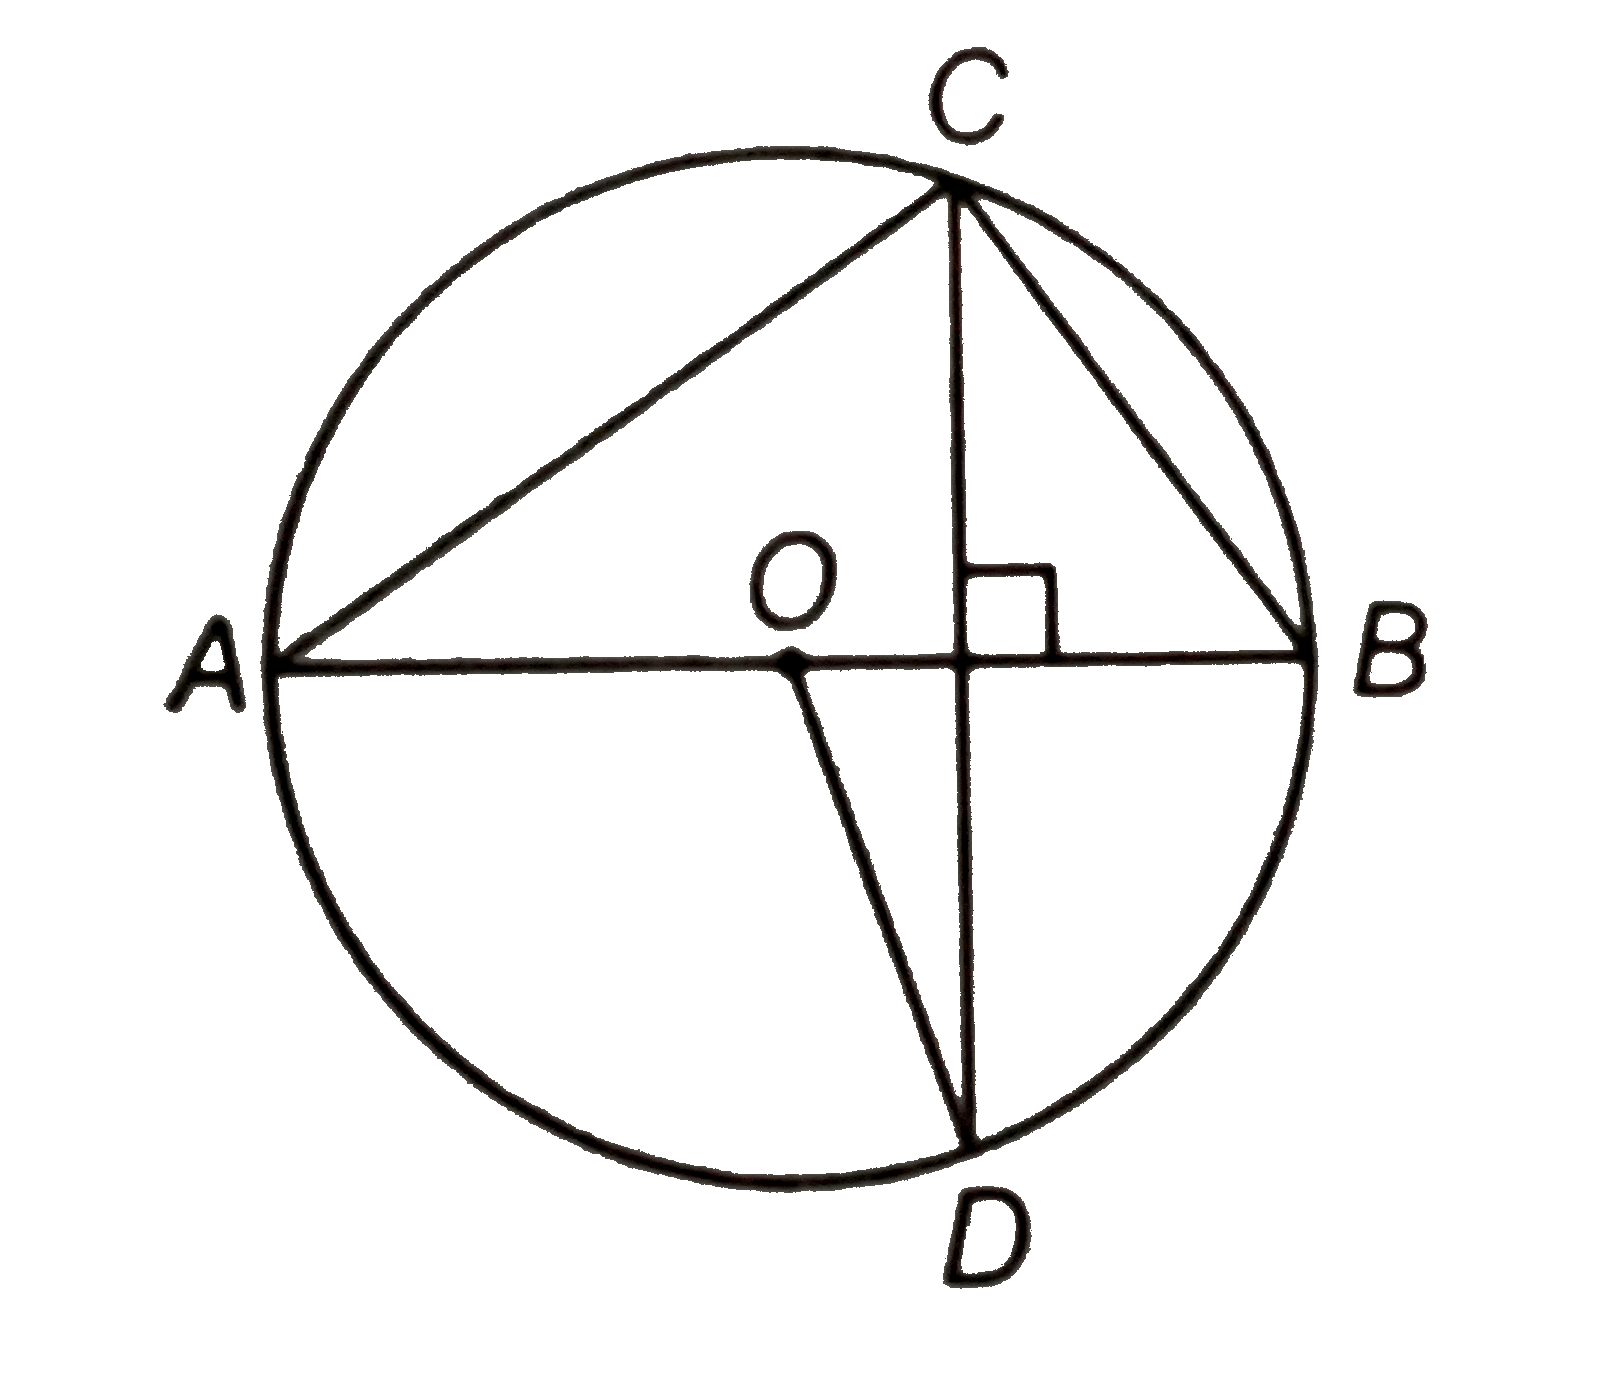 If figure, O is the centre of the circle, BD=OD and CD bot AB.